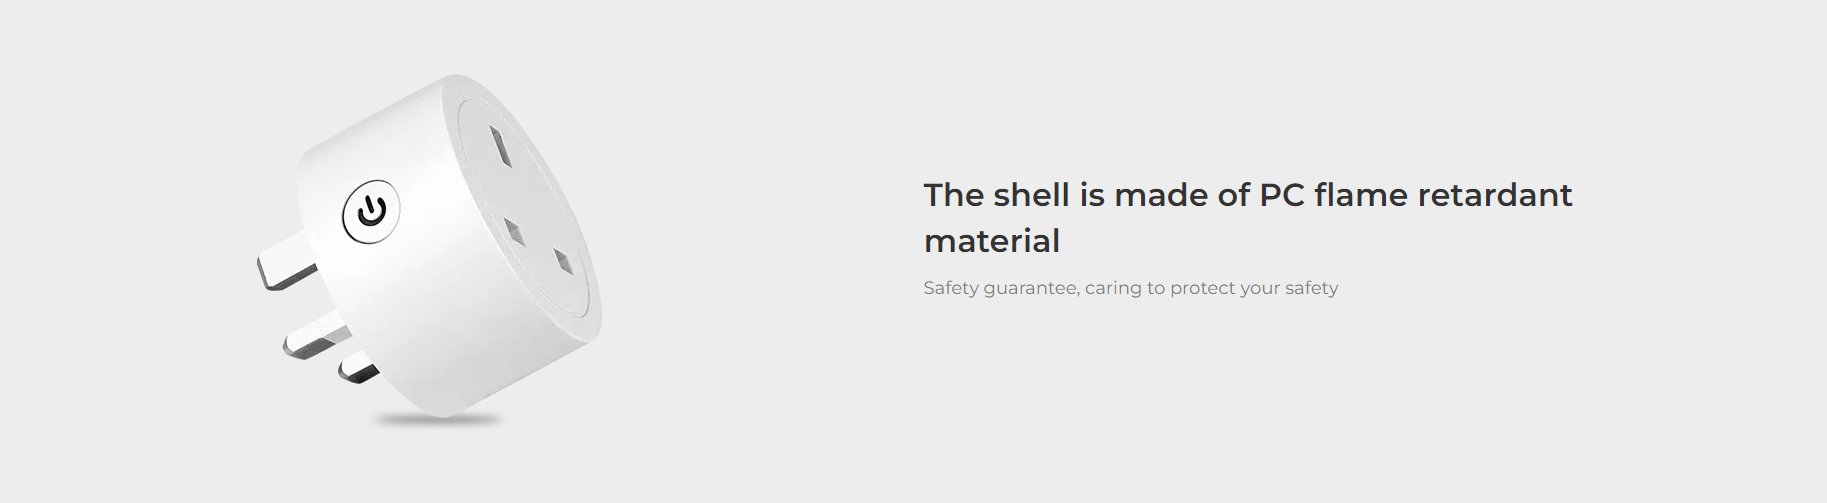 The shell is made of PC flame retardant material Safety guarantee, caring to protect your safety